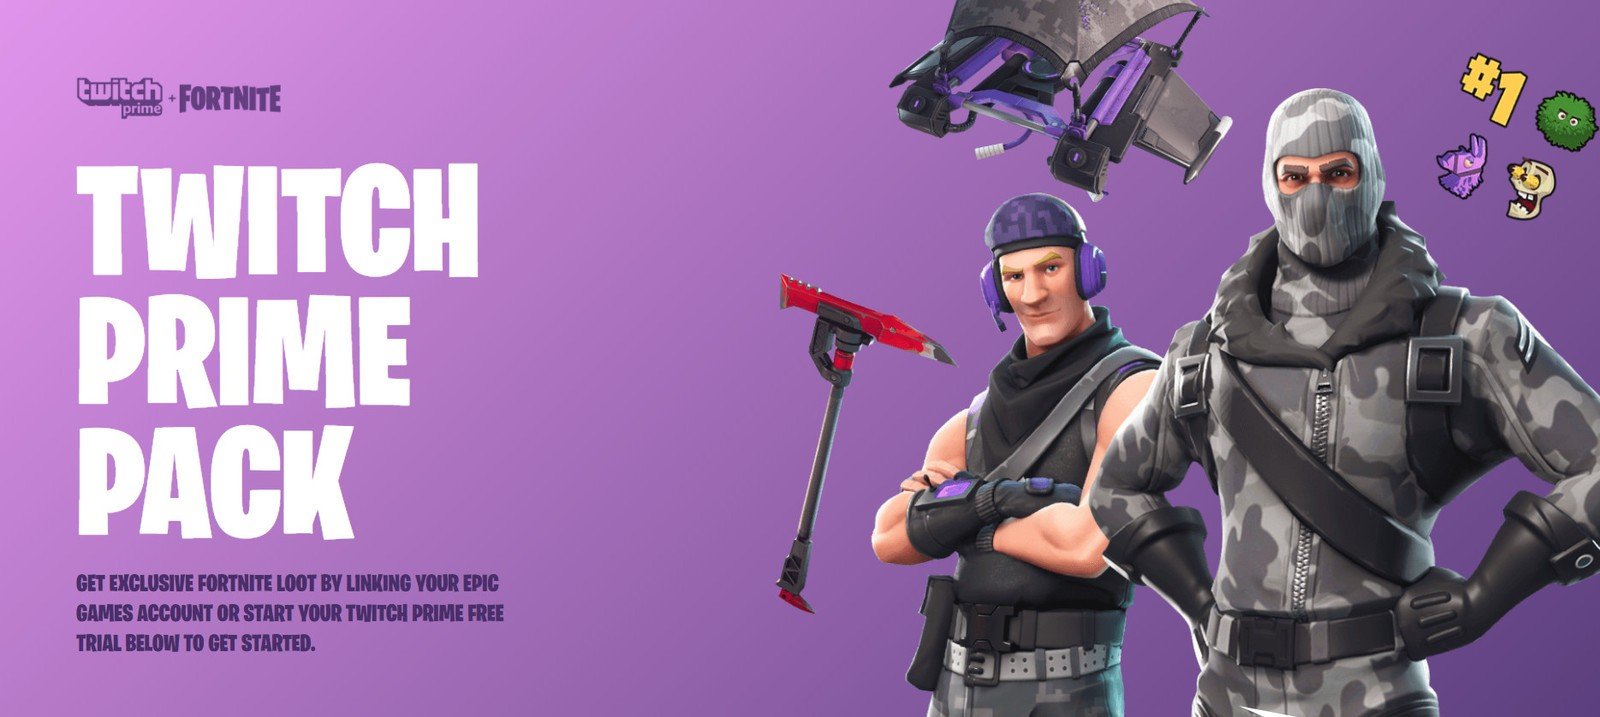 Fortnite Twitch Prime Pack Pc Ps4 Xbox One Rocketr Net